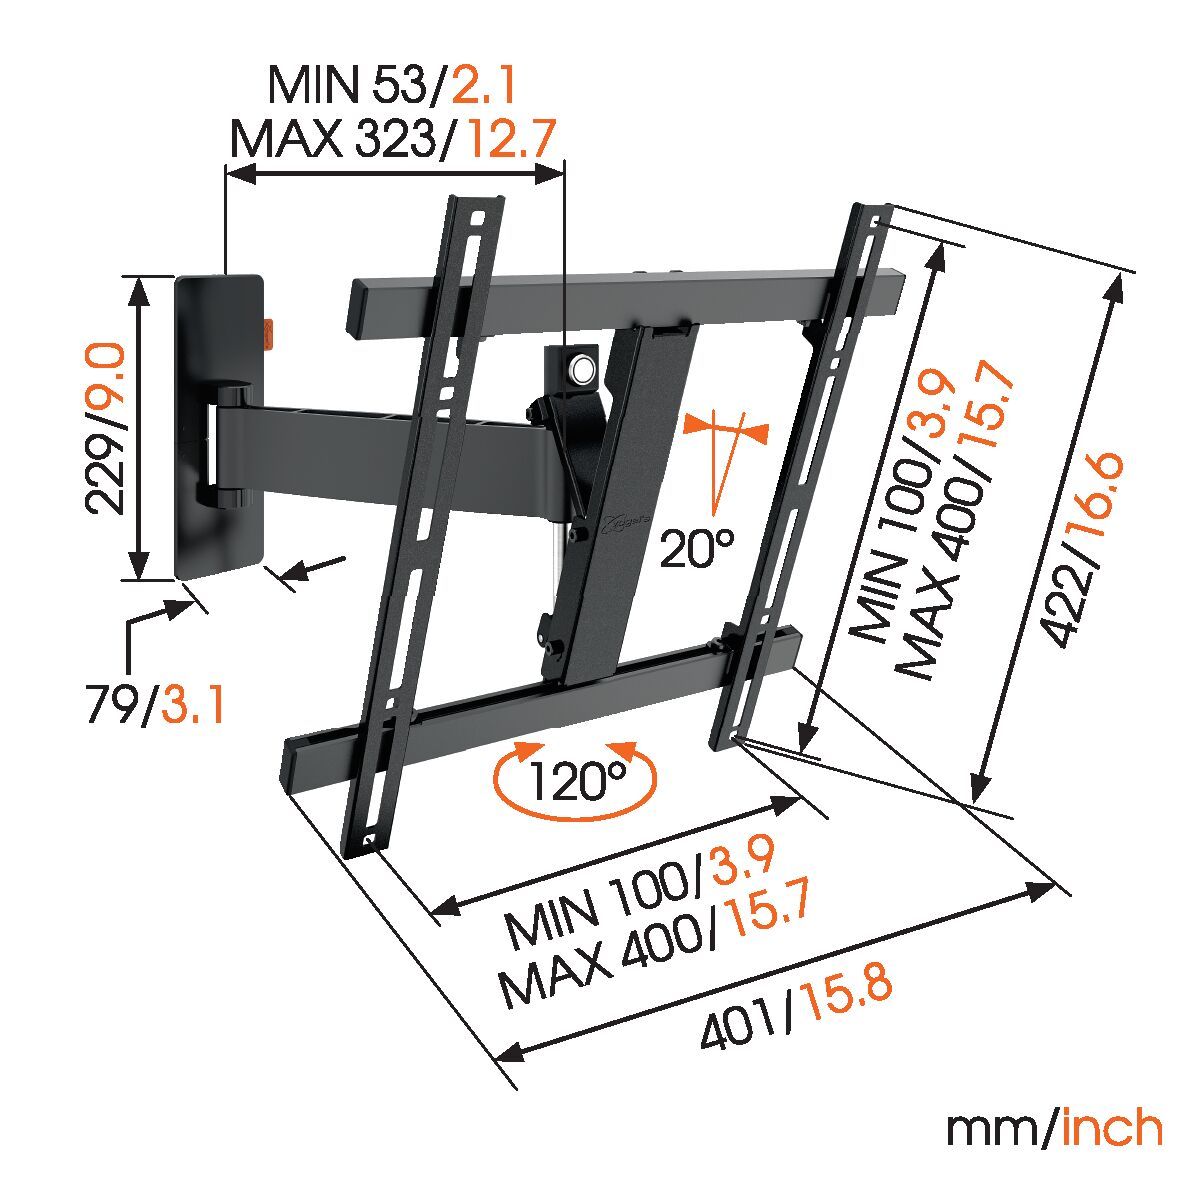 Vogel's W52070 Full-Motion TV Wall Mount (black) - Suitable for 32 up to 55 inch TVs - Motion (up to 120°) - Tilt up to 20° - Dimensions